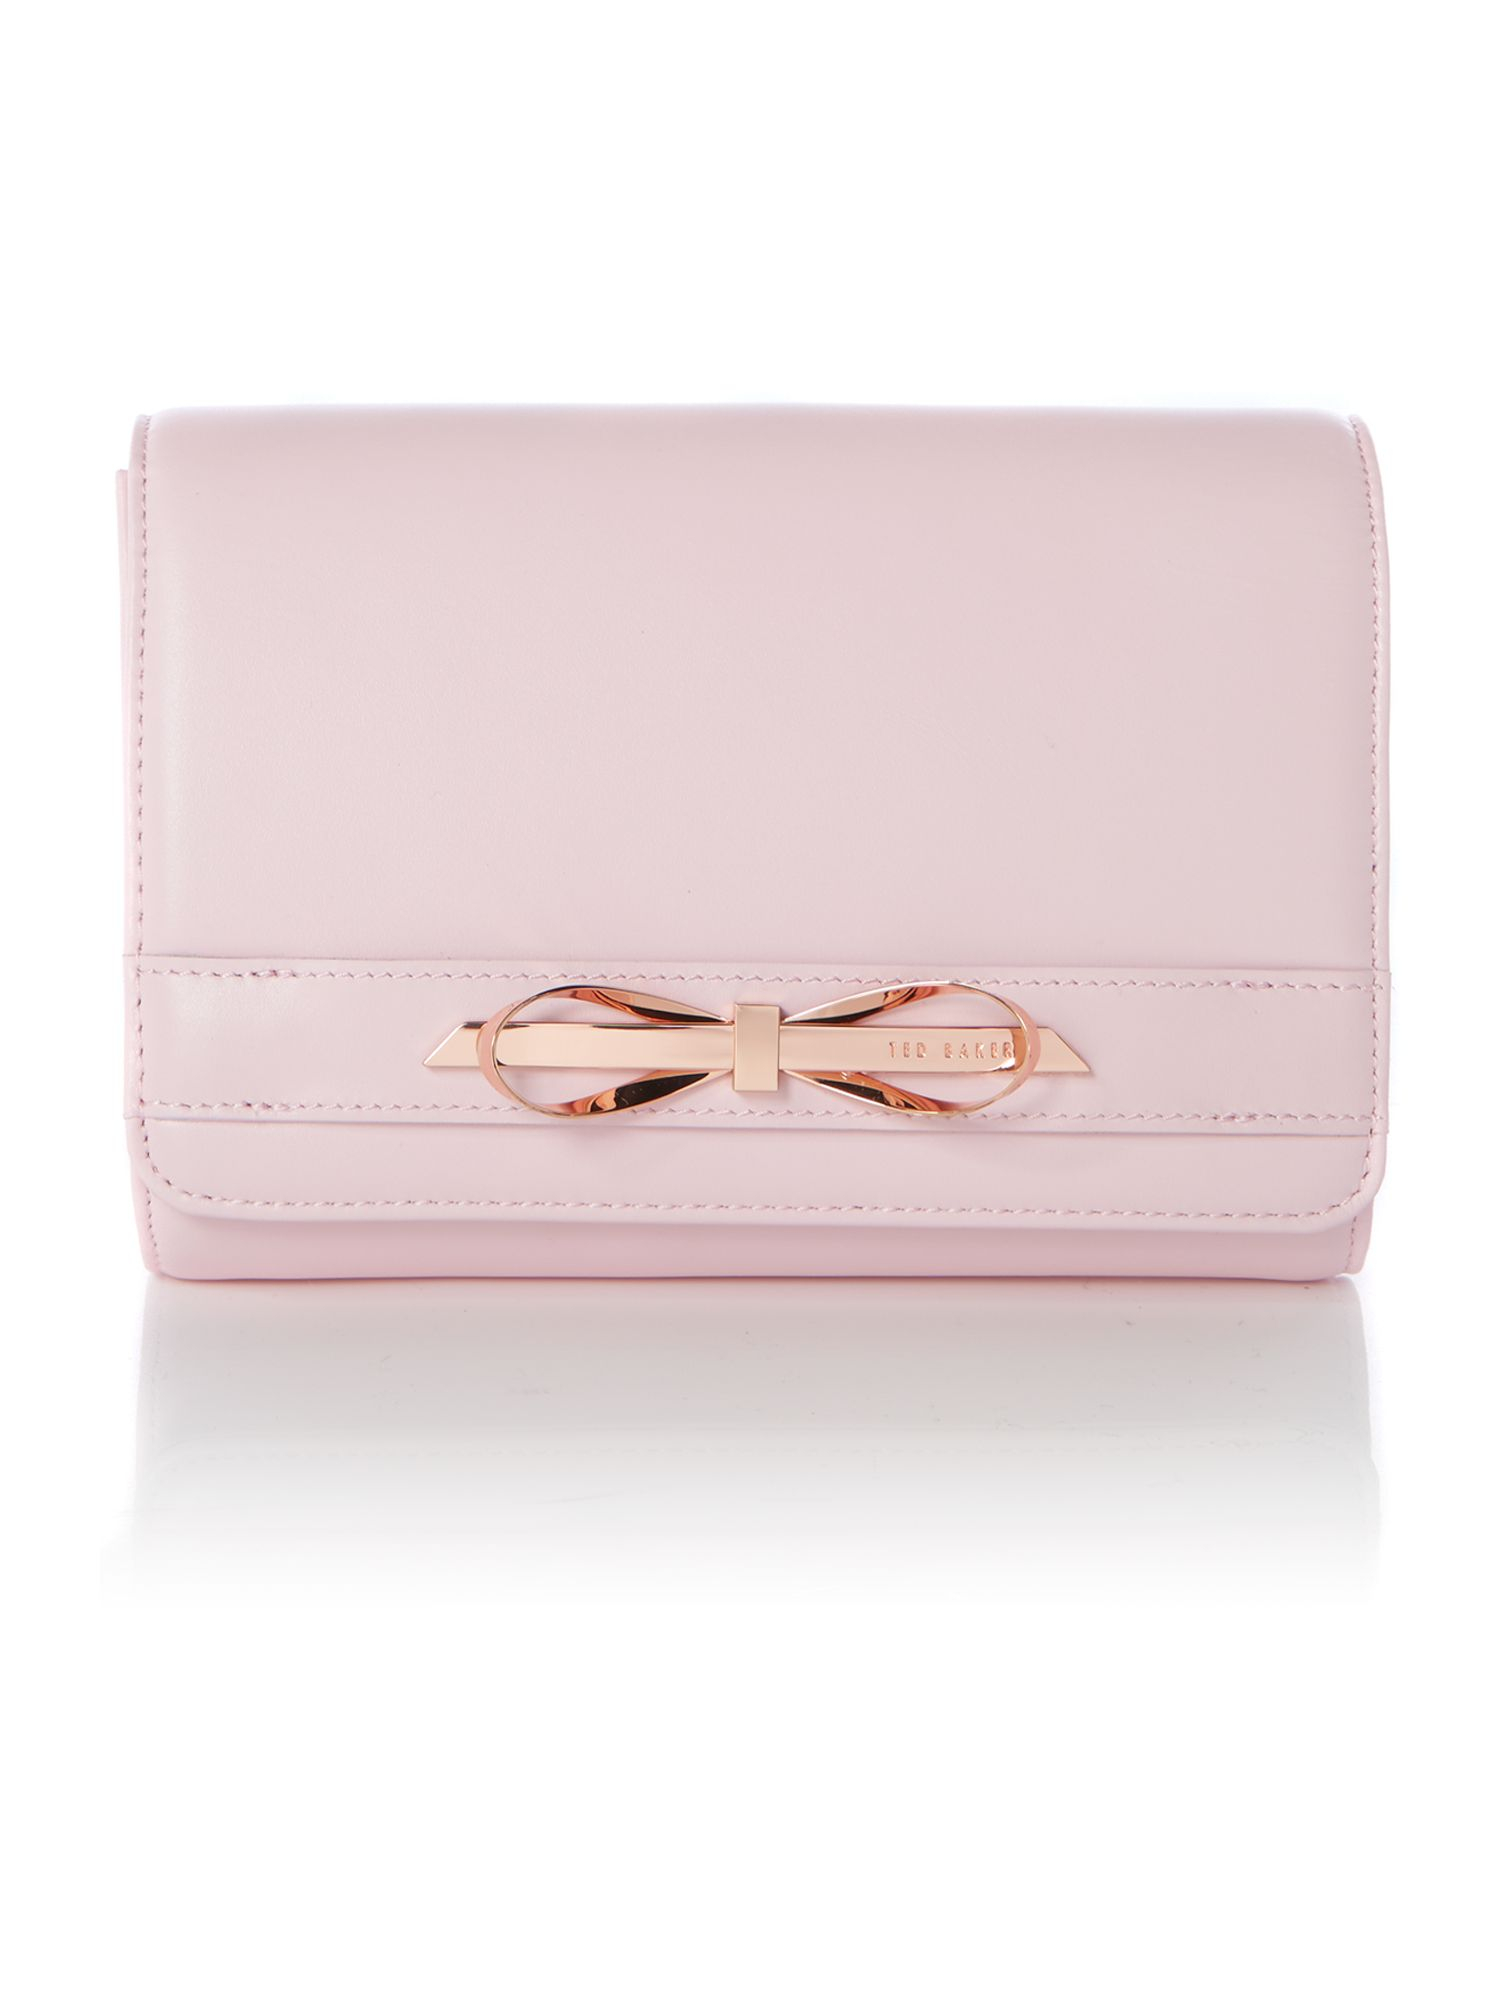 Ted baker Pale Pink Large Bow Leather Cross Body Bag in Pink (Pale ...